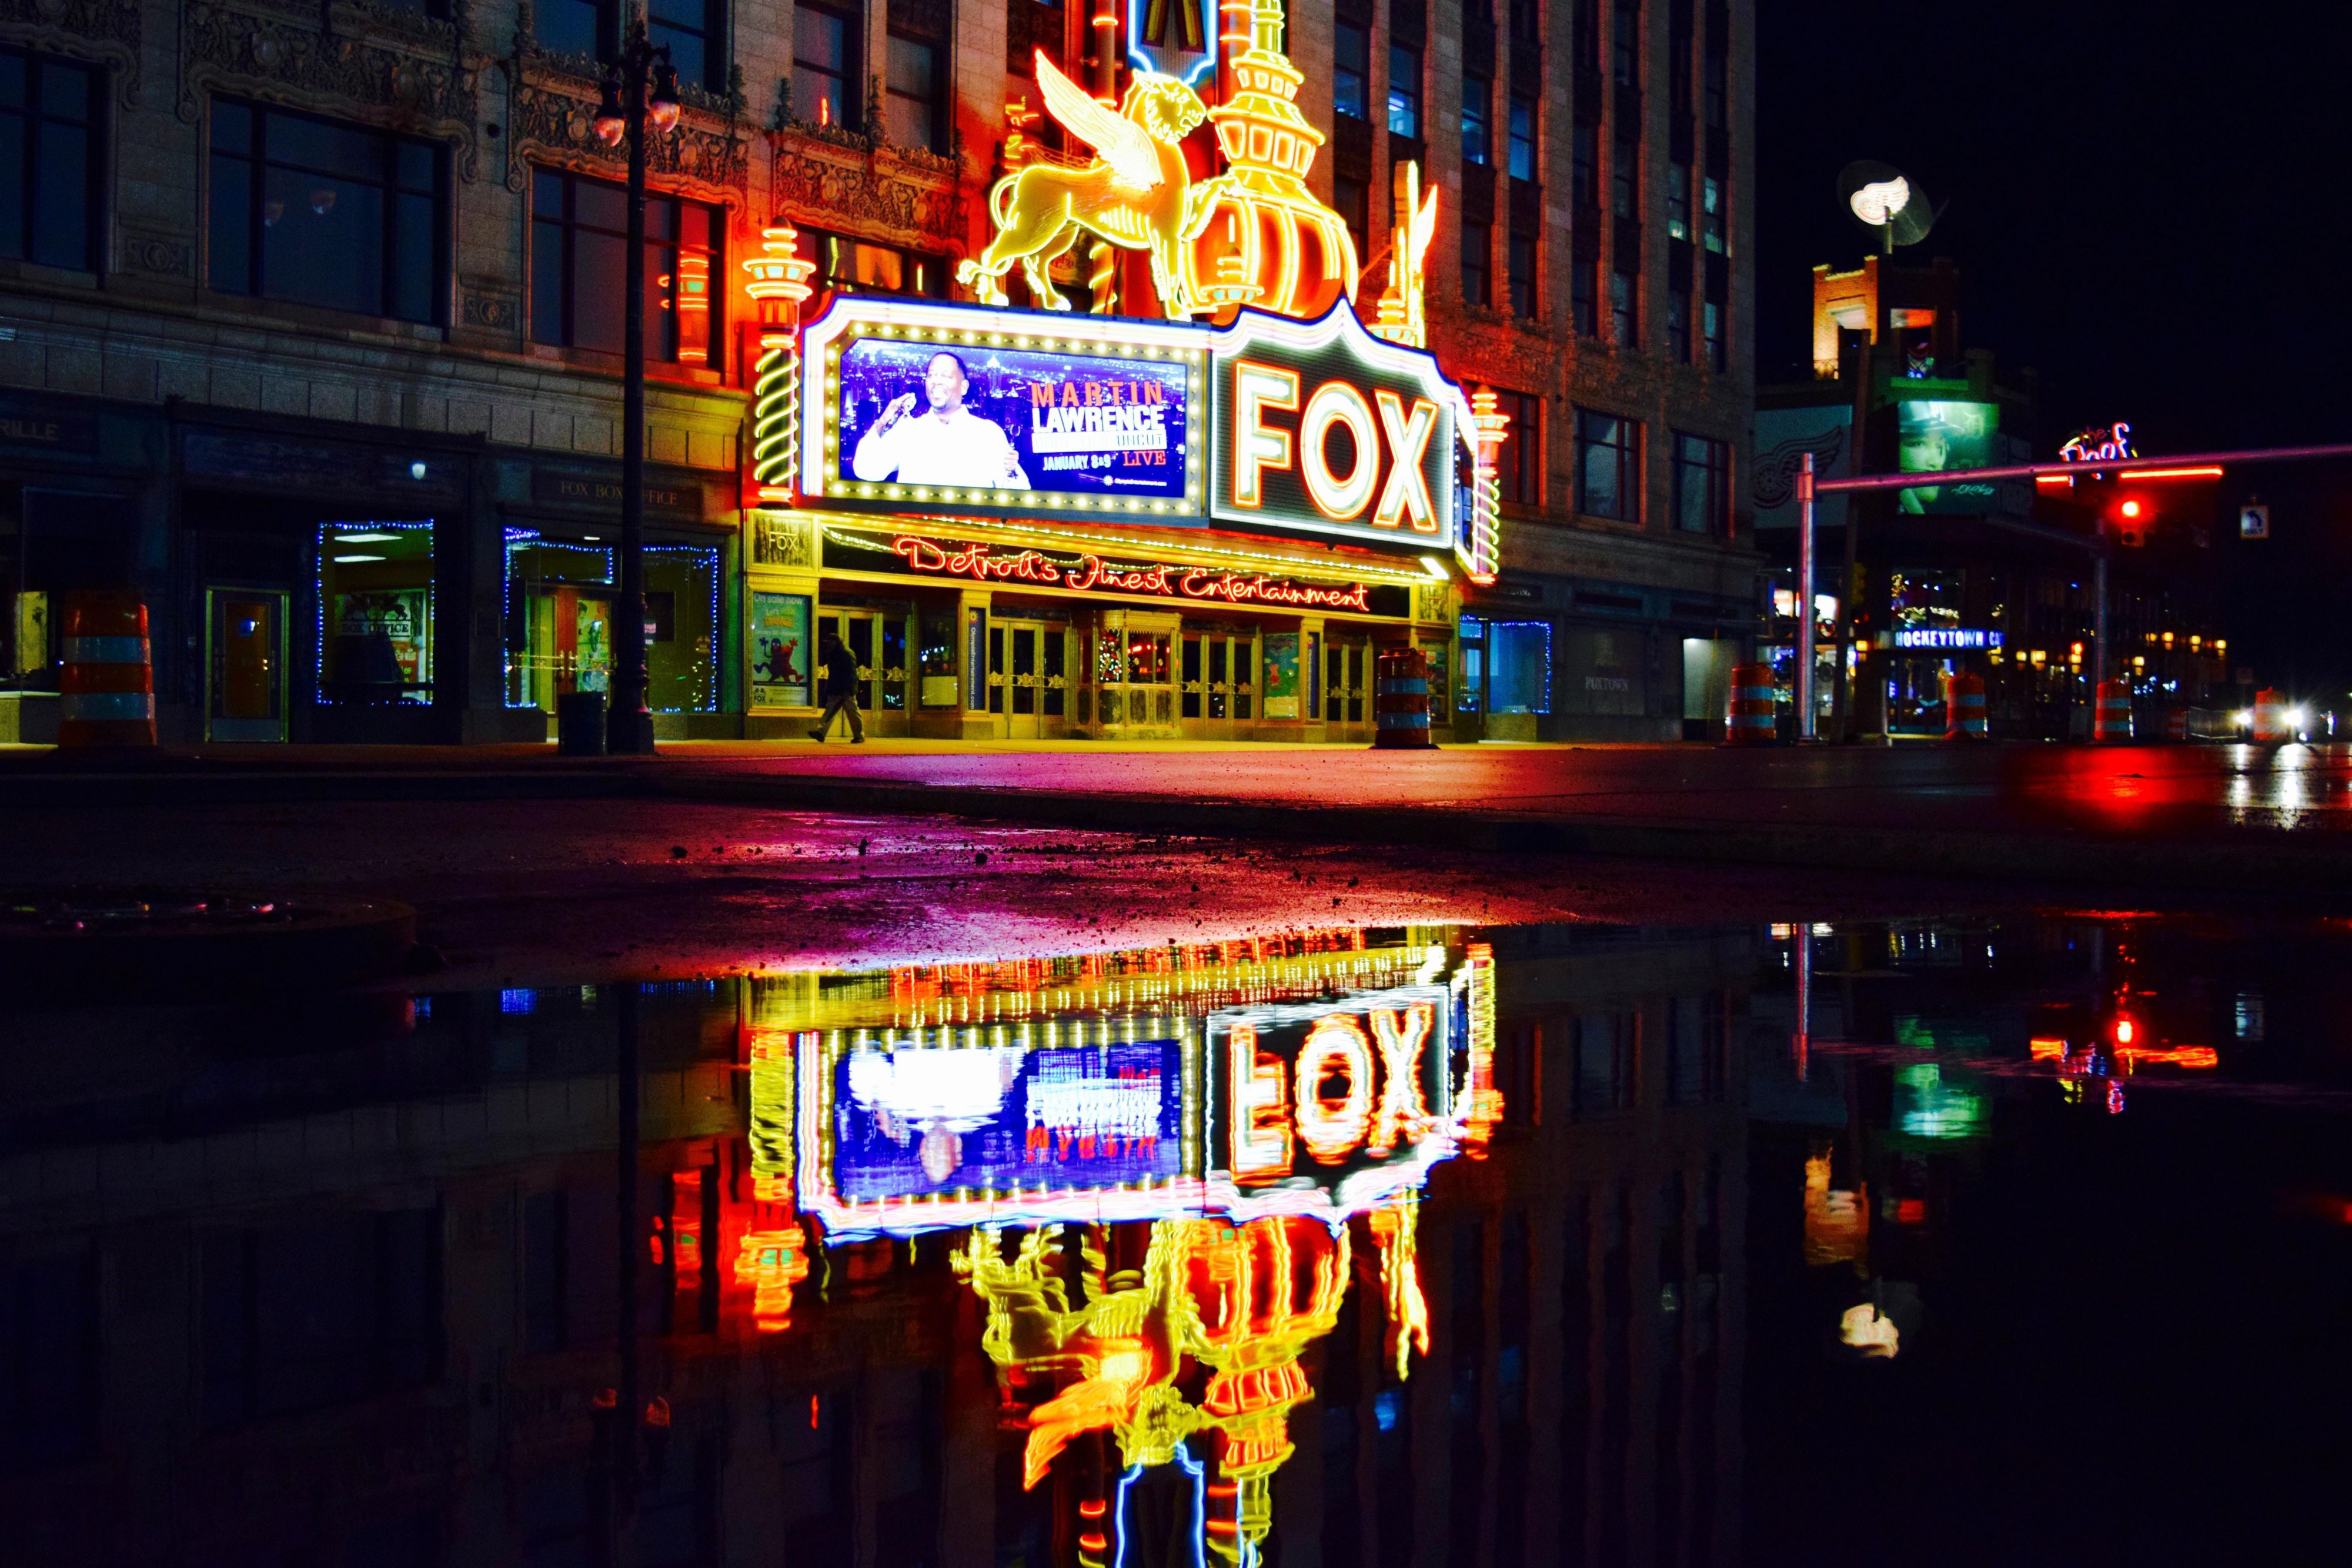 Experience the heartbeat of downtown Detroit with its music roots & urban energy. Our hotel is within minutes of downtown Detroit's attractions, shopping, dining, & entertainment. See a concert at the Fox Theatre & explore the Detroit Institute of Art and Motown Museum. Sports fans can stay close to Comerica Park, Little Caesars Arena & Ford Field.